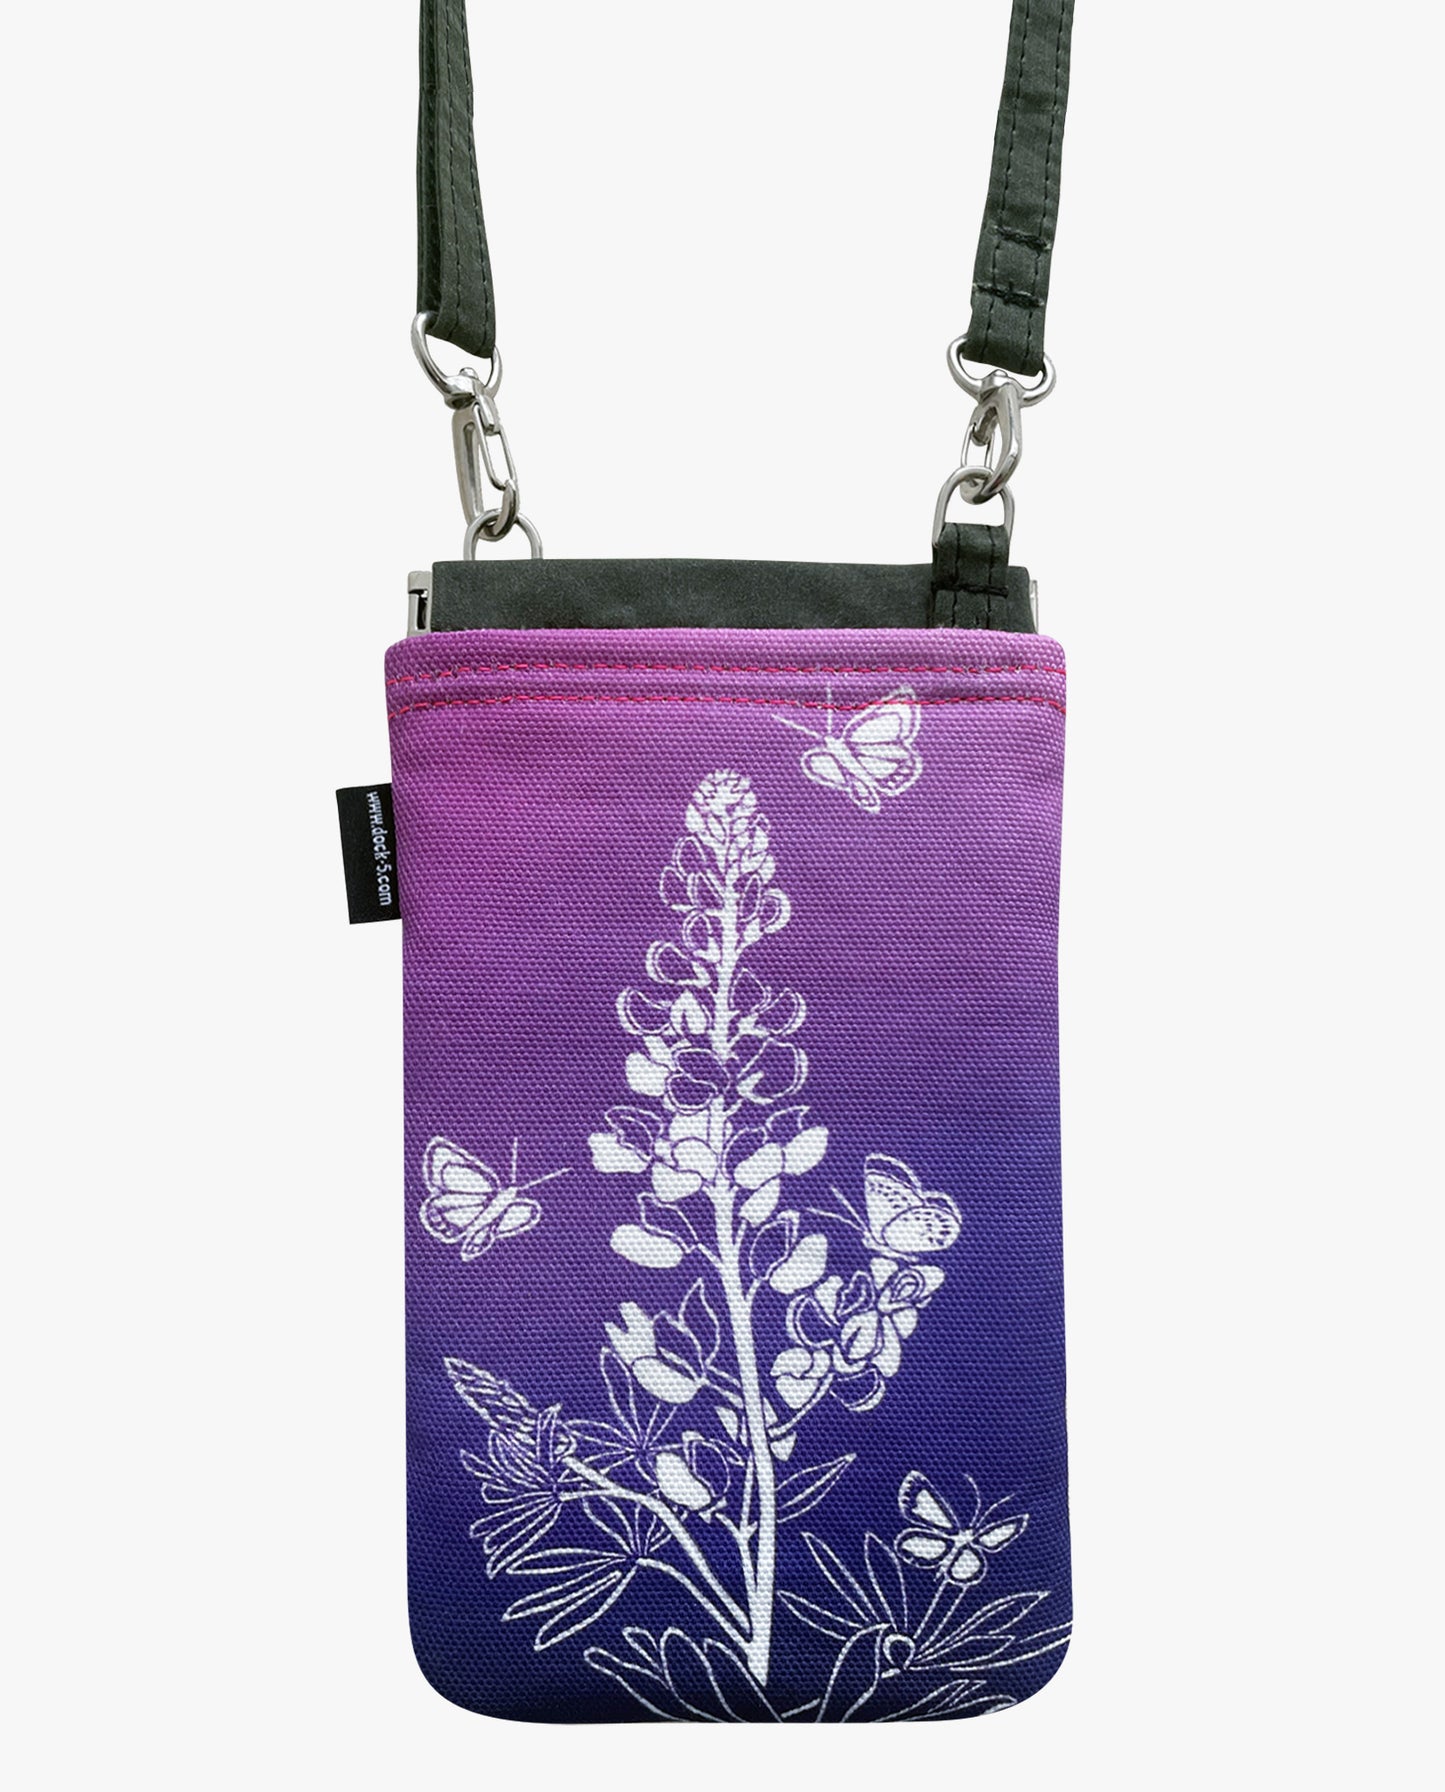 Lupine cell phone bag front view by Dock 5 Duluth